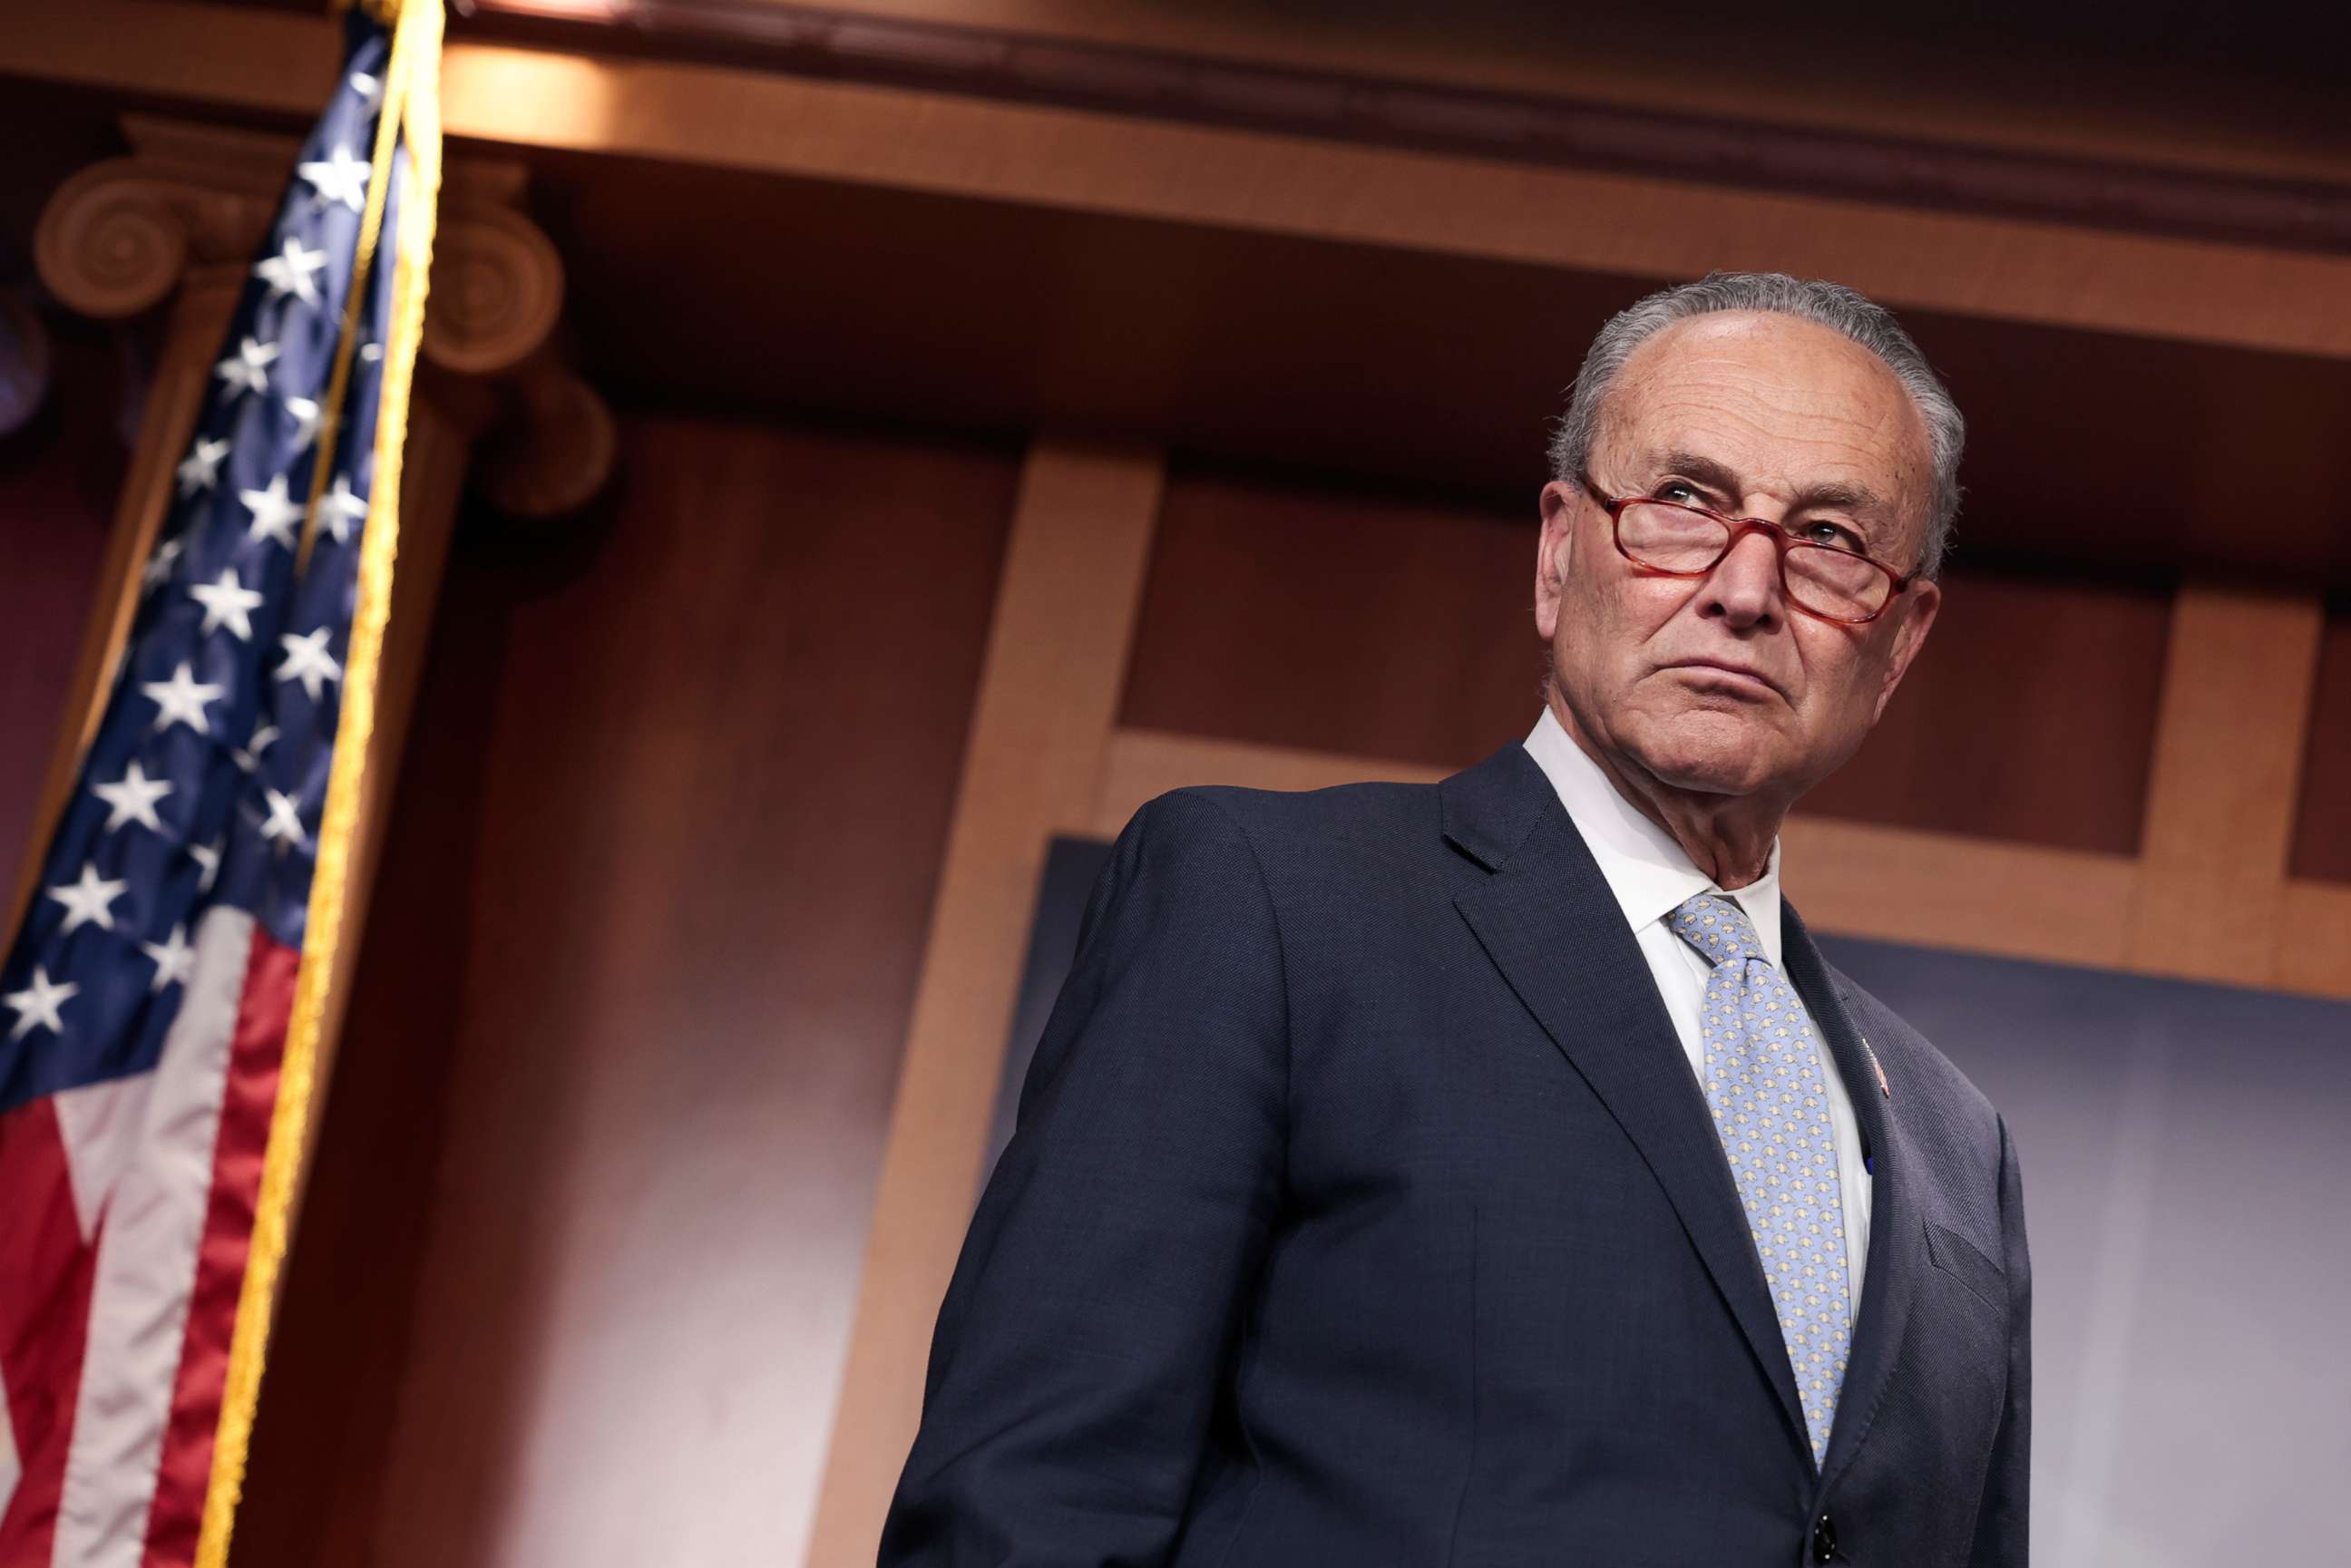 PHOTO: Senate Majority Leader Chuck Schumer attends a press conference at the U.S. Capitol in Washington, May 05, 2022.